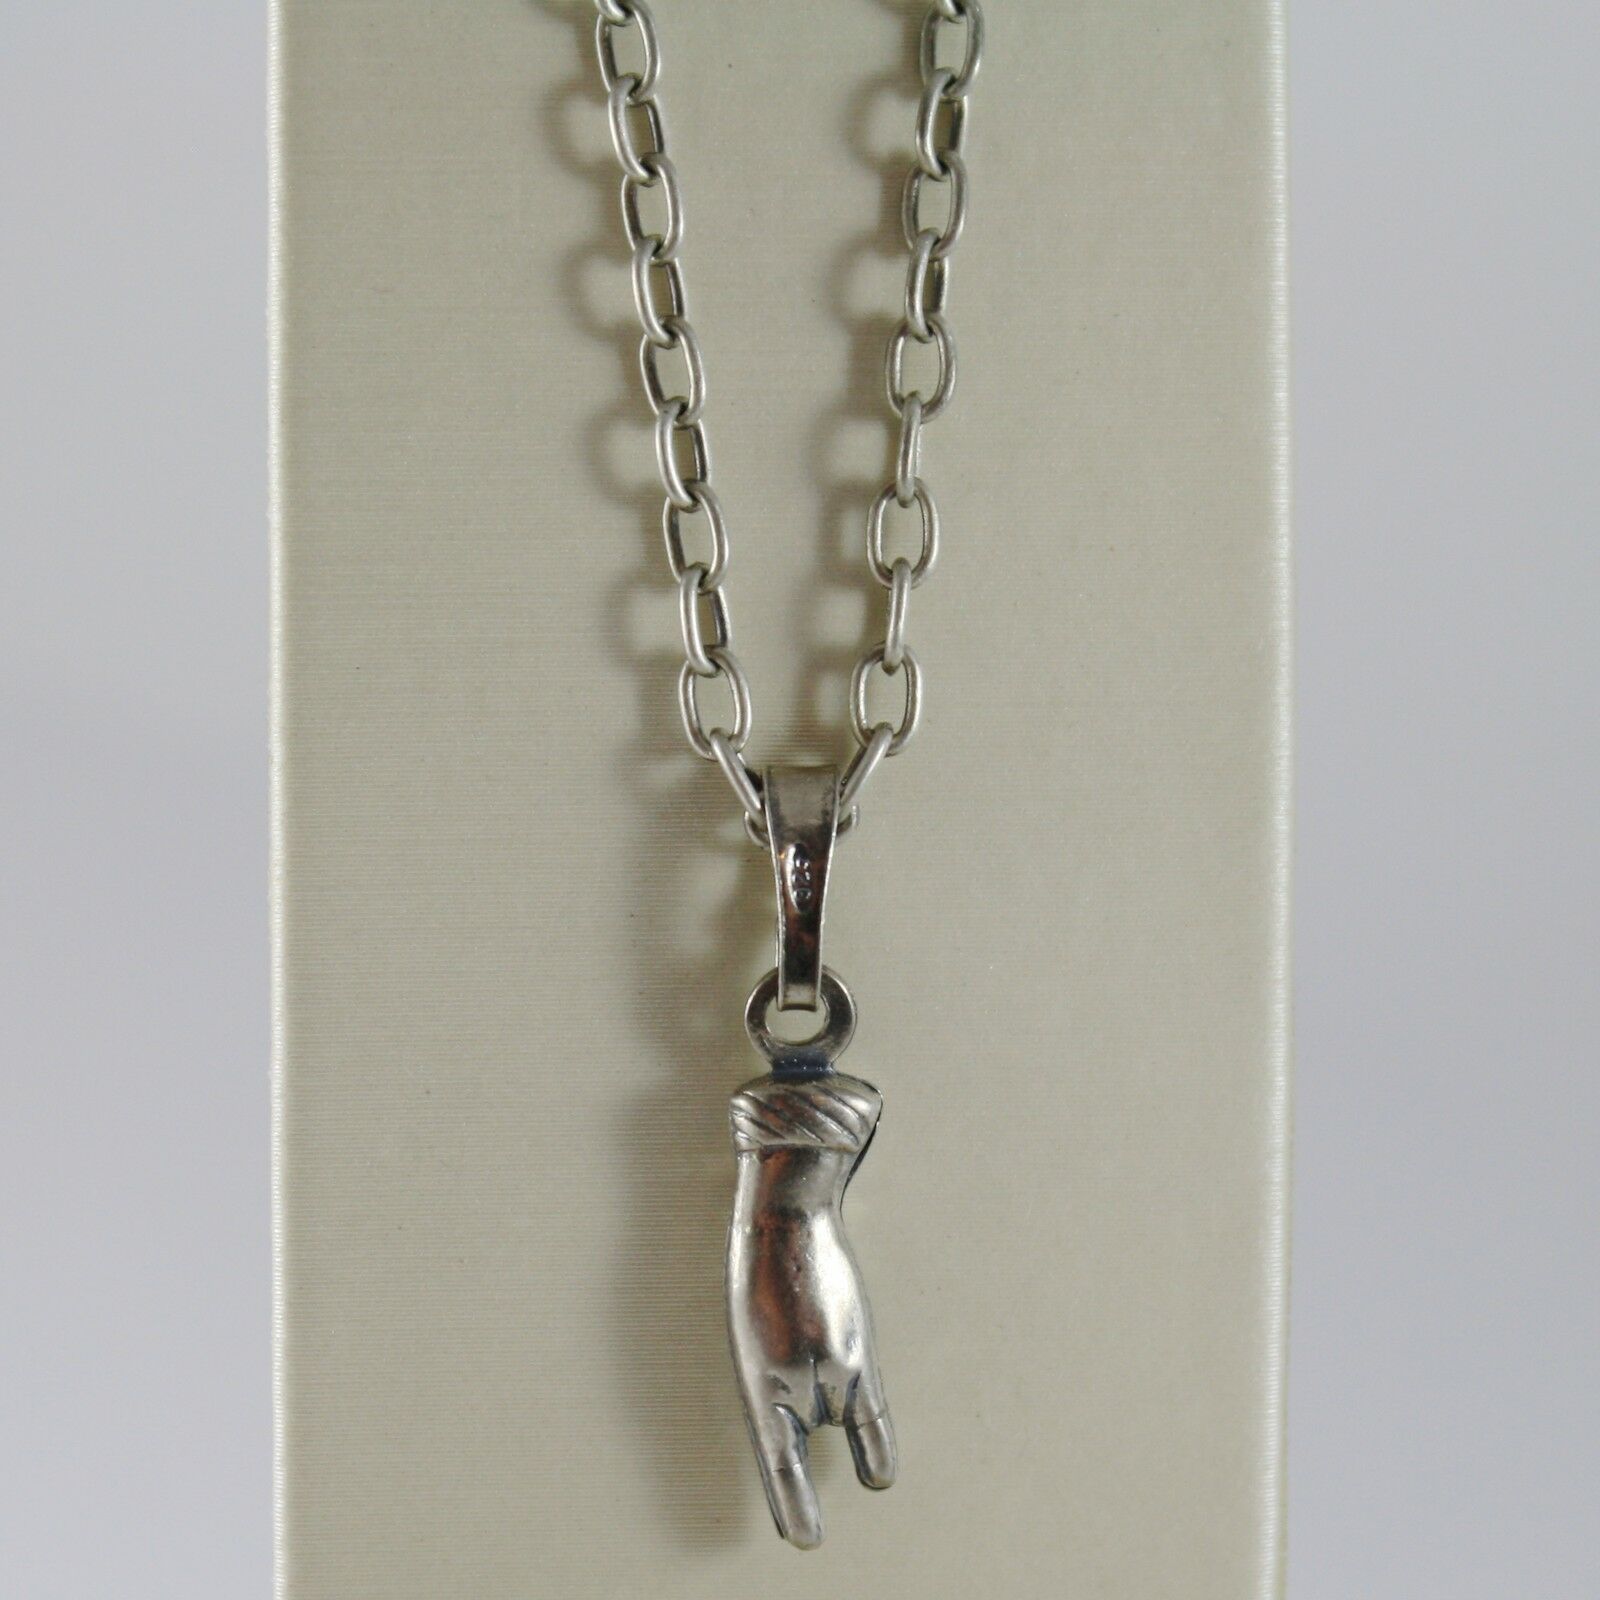 Primary image for 925 BURNISHED SILVER HAND HORNS NECKLACE PENDANT WITH OVAL CHAIN MADE IN ITALY